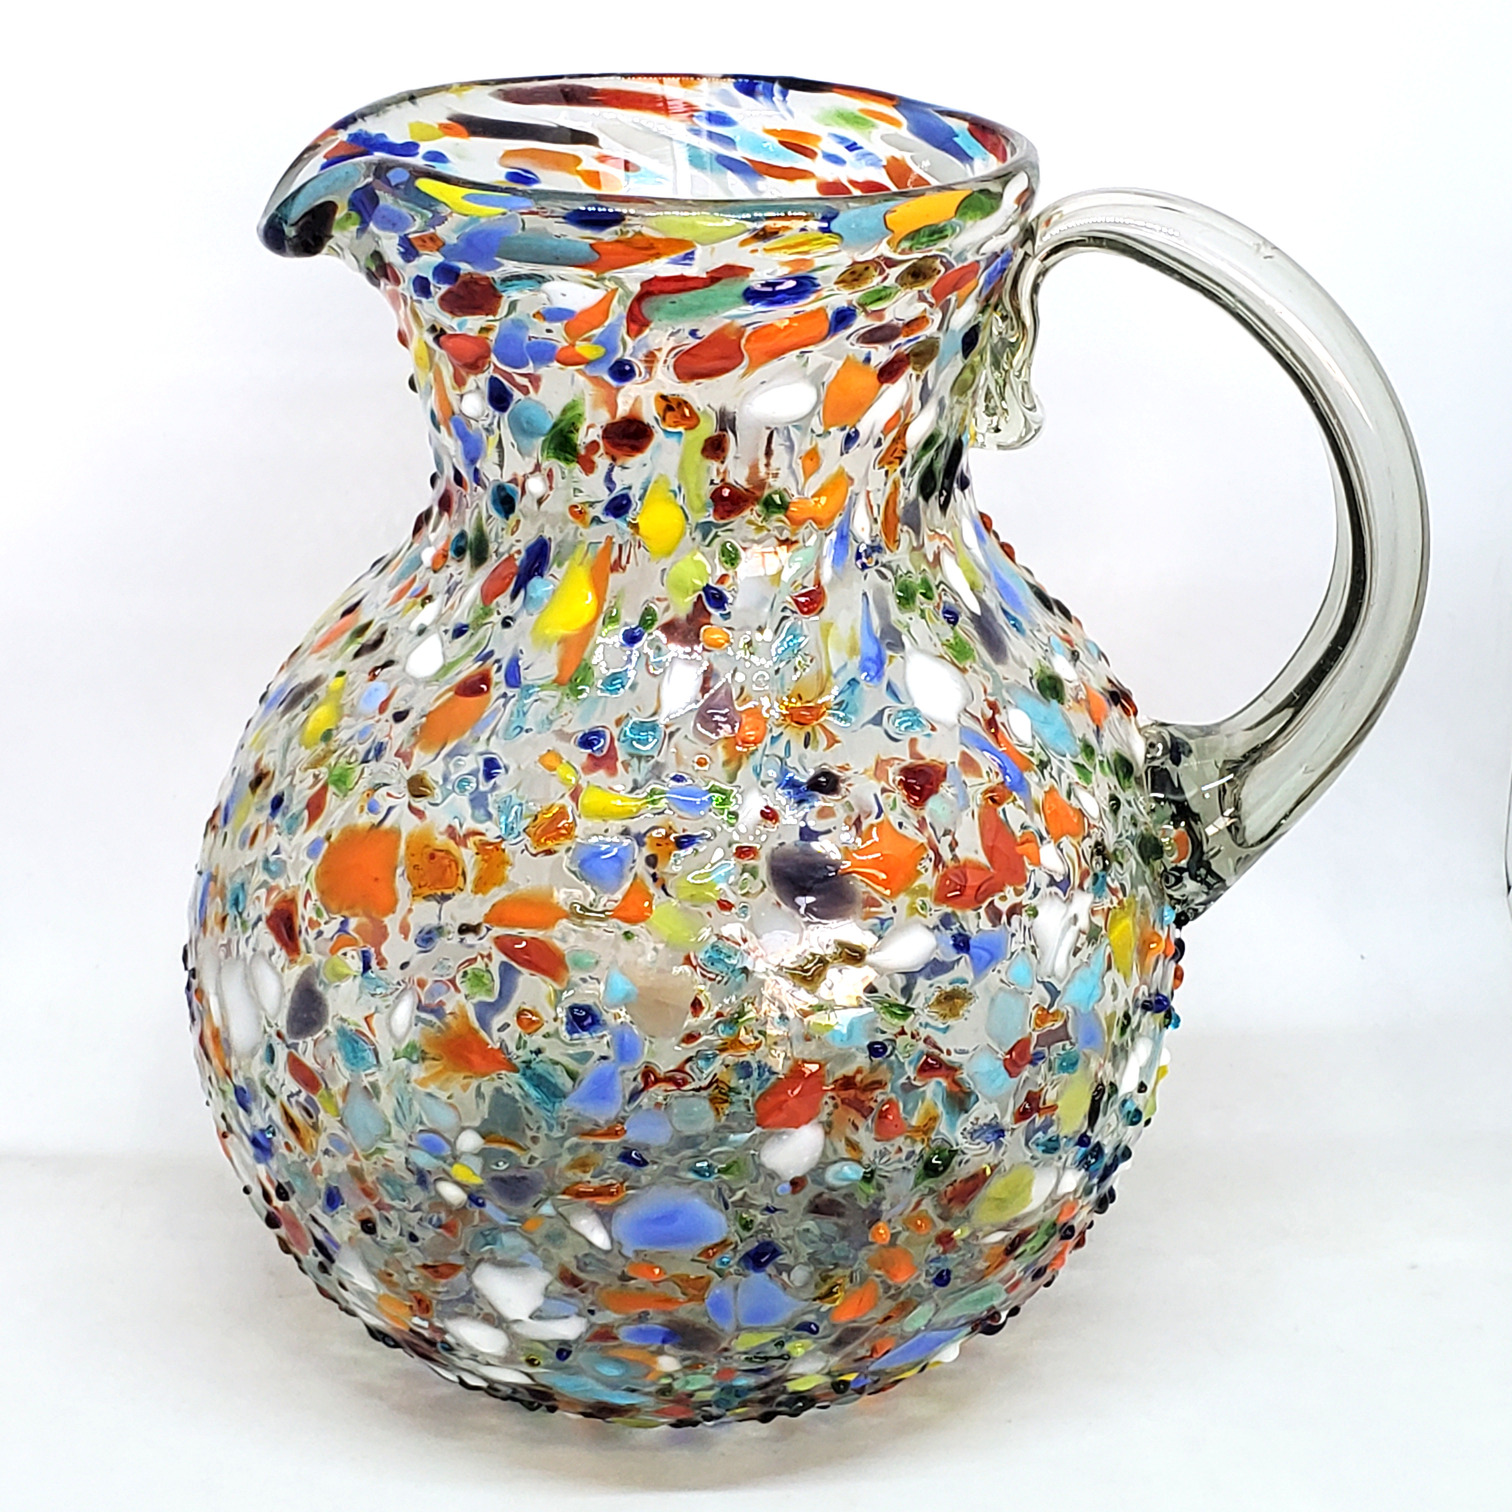 Confetti Glassware / Confetti Rocks 120 oz Large Bola Pitcher / Confetti rocks appear to rest inside this modern blown glass pitcher that will make your table setting shine. Each pitcher is adorned with hundreds of tiny multicolor glass particles, giving it a one-of-a-kind look and feel.